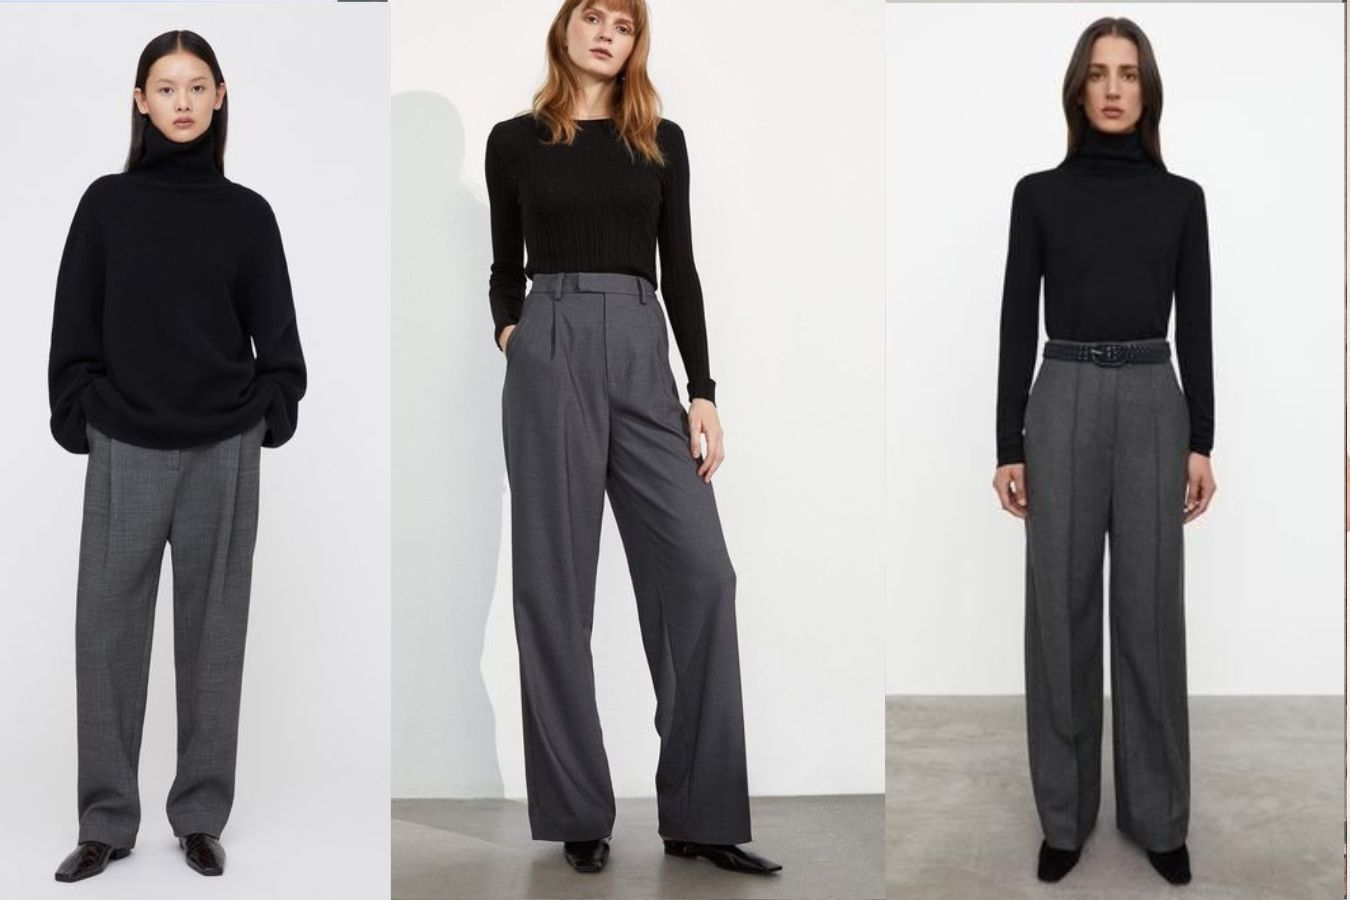 Wear a Black Turtleneck With Gray Trousers